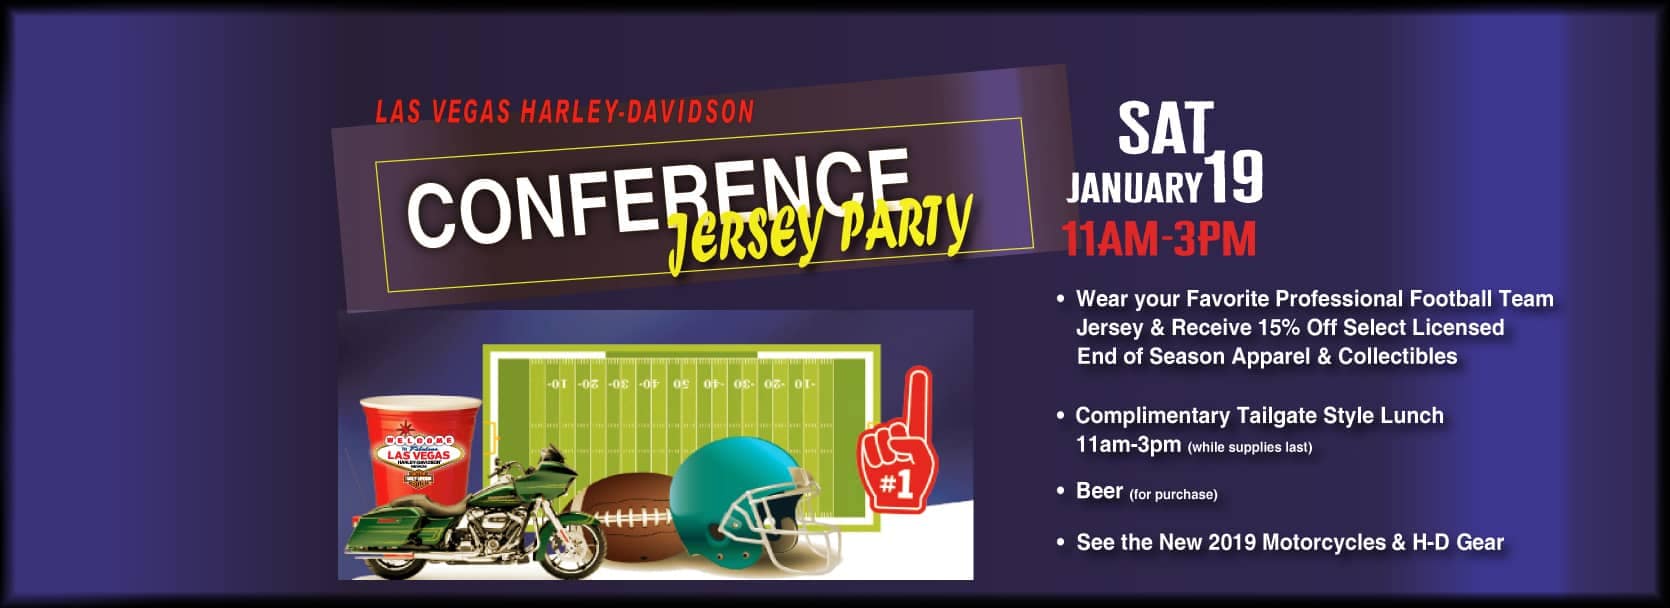 Don’t Miss the Upcoming Las Vegas Harley-Davidson Conference Jersey Party